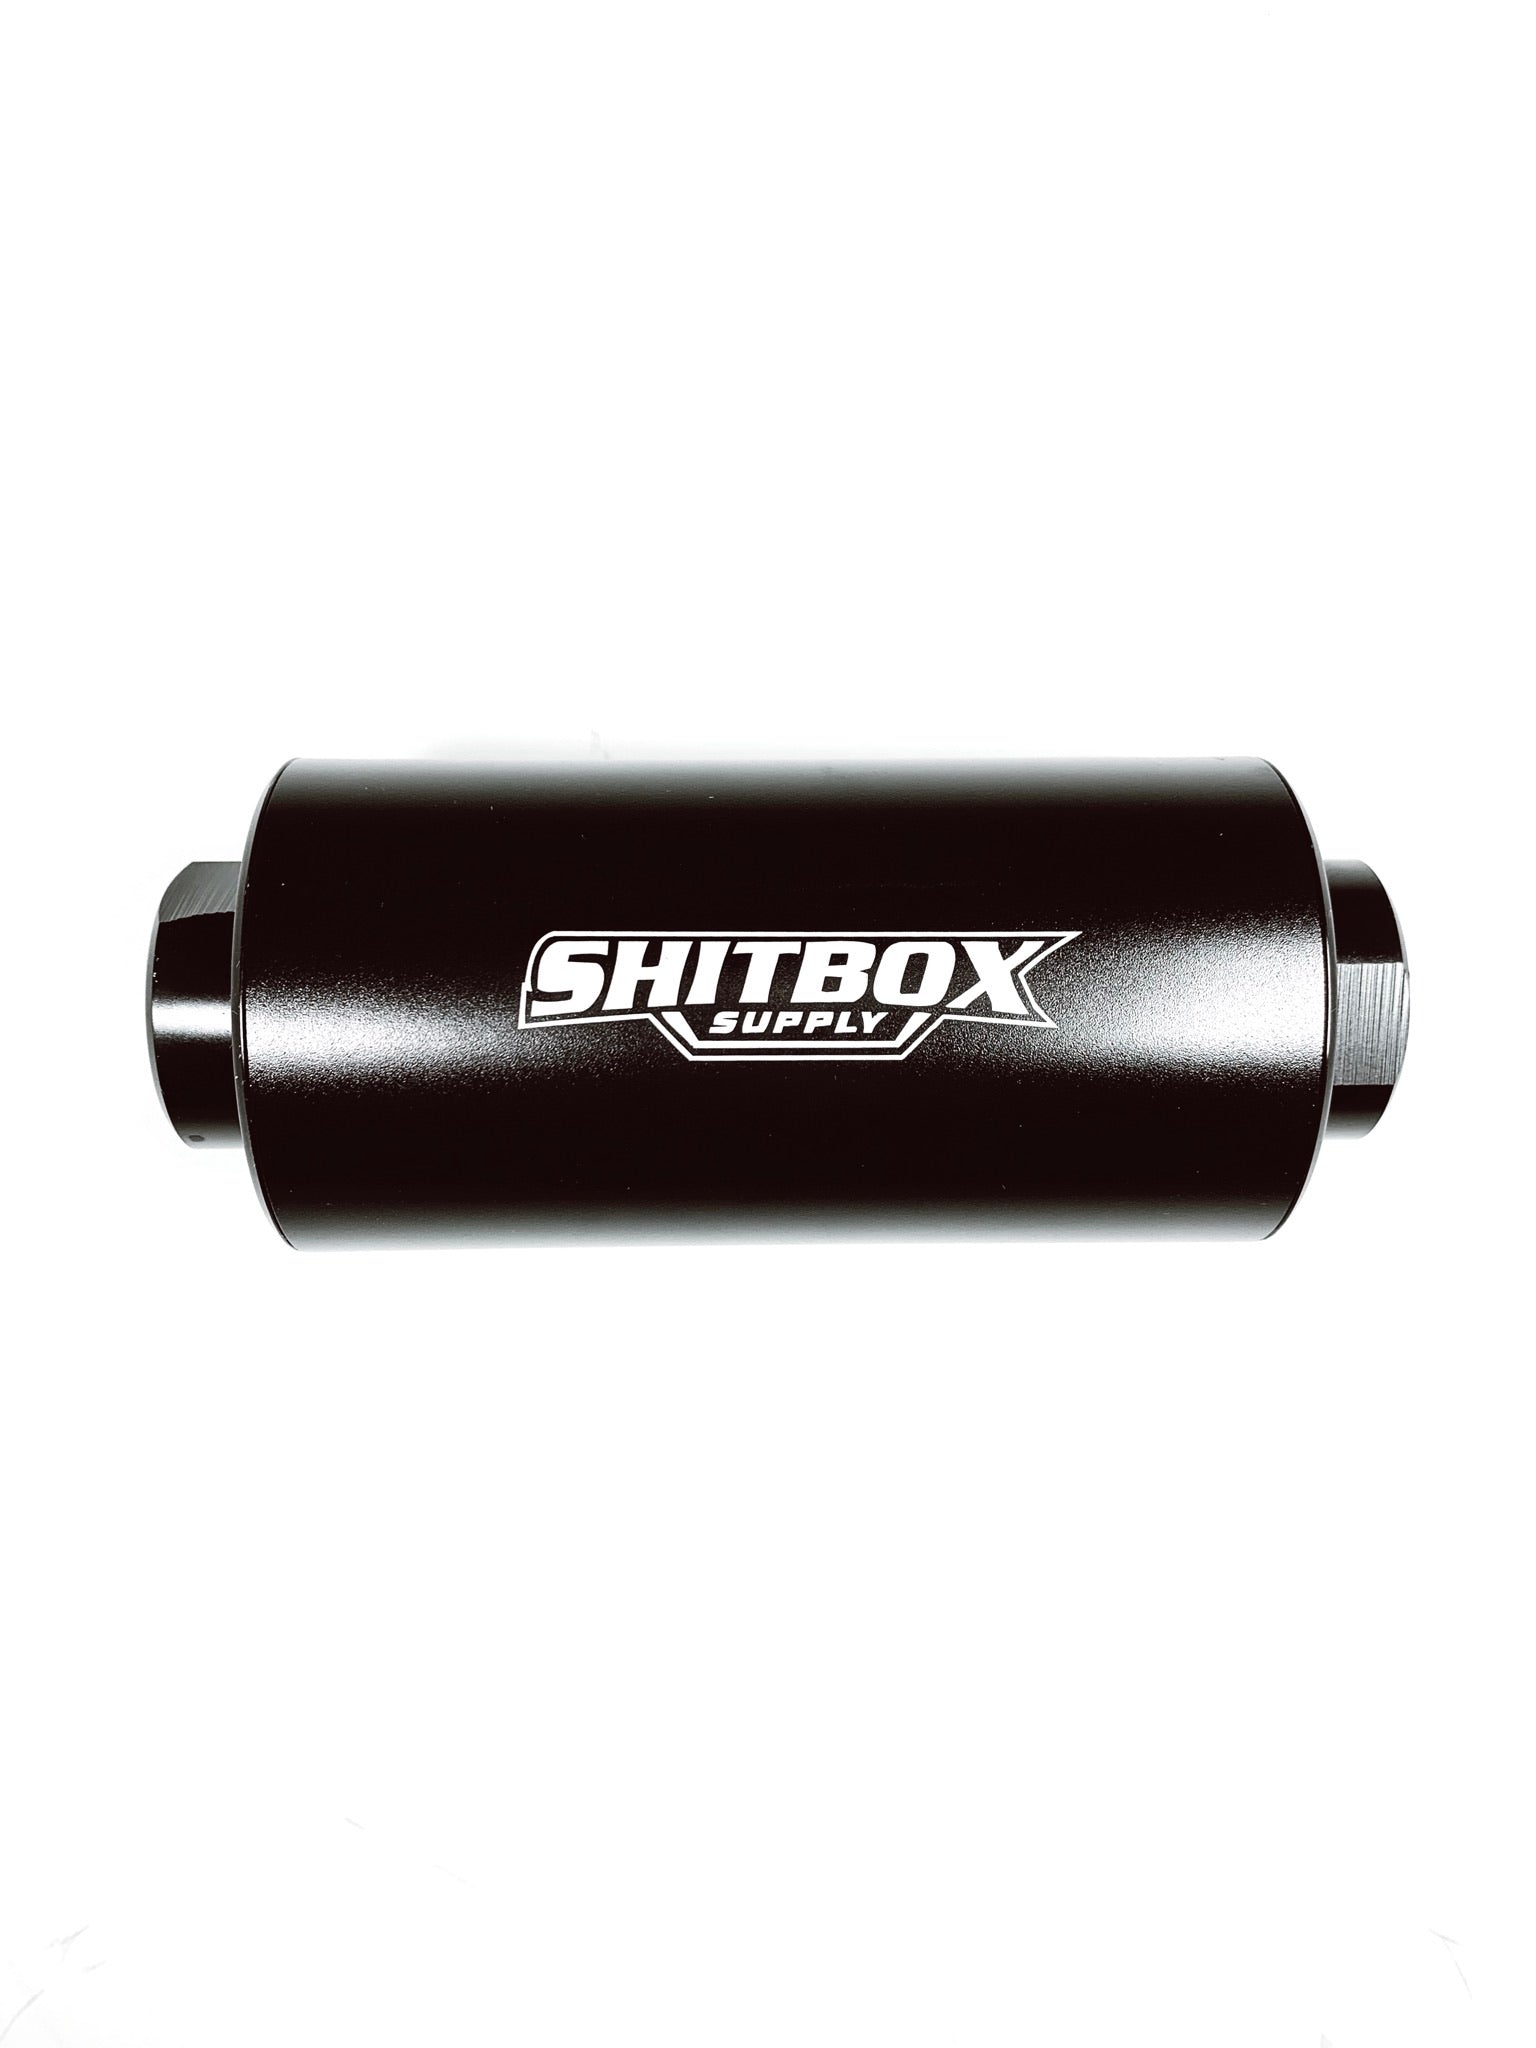 SEP/SBS 044 inline and in-tank Fuel Filters